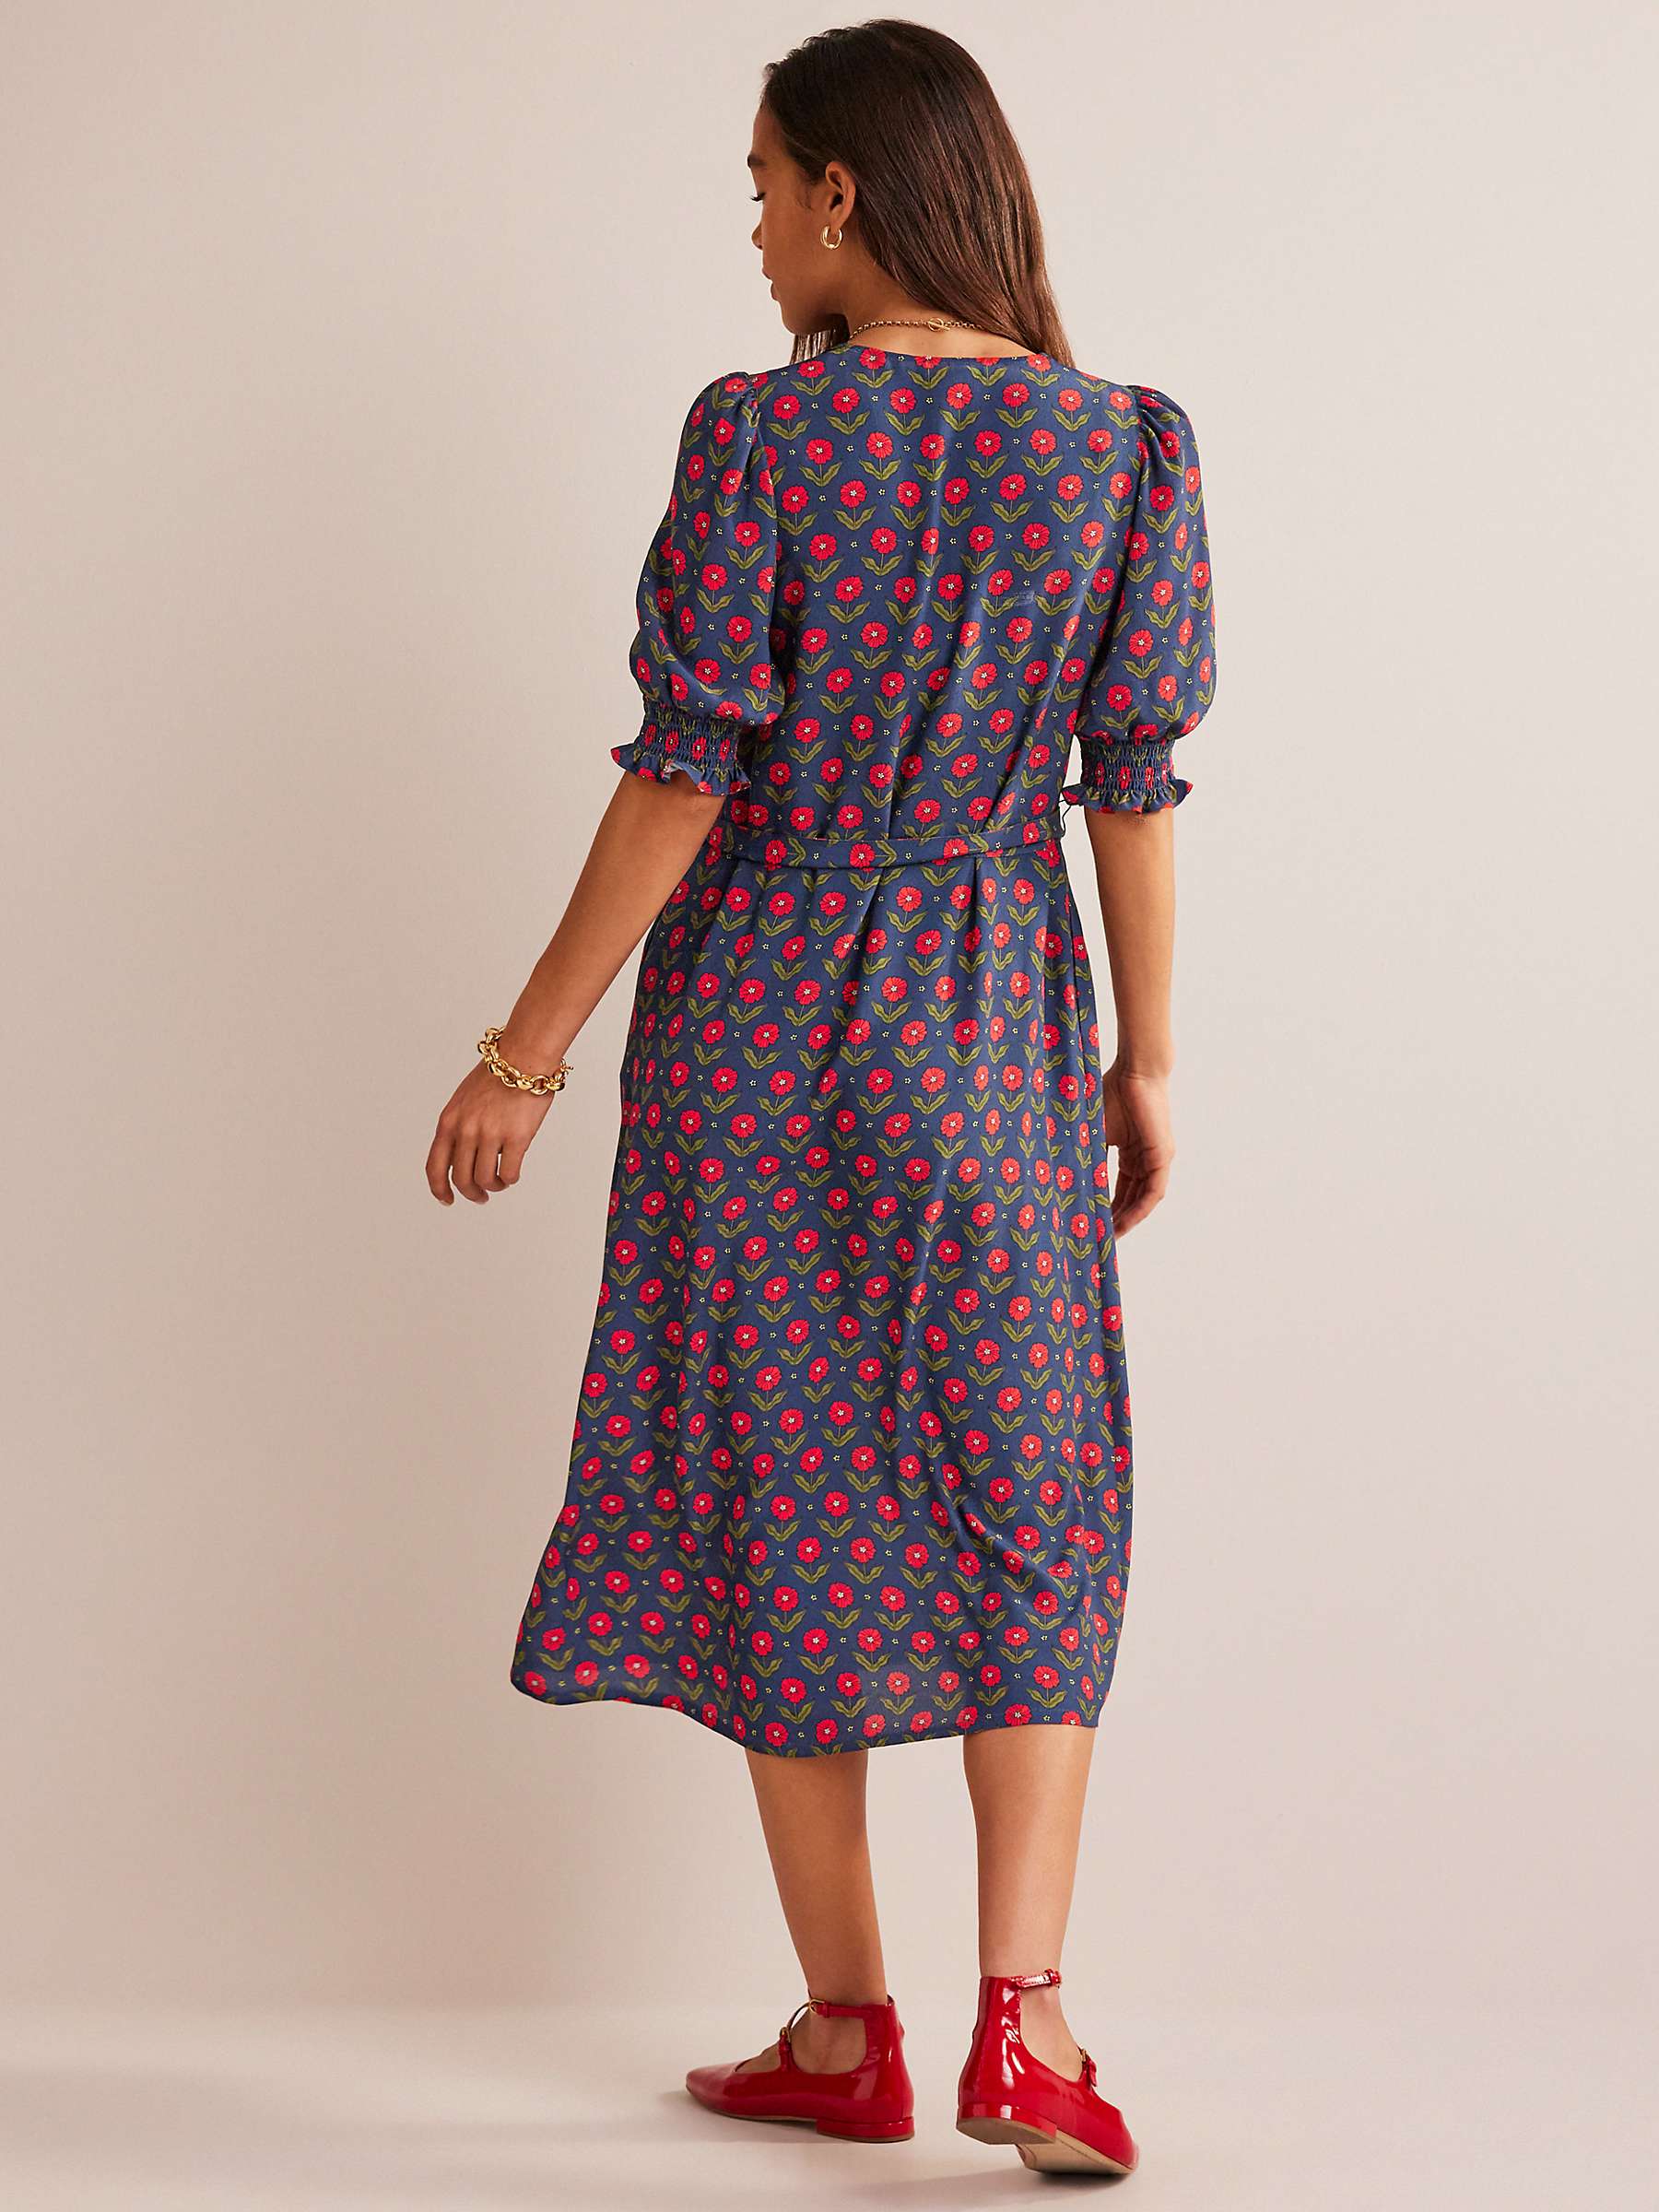 Buy Boden Daisy Ecovero Smock Dress Online at johnlewis.com